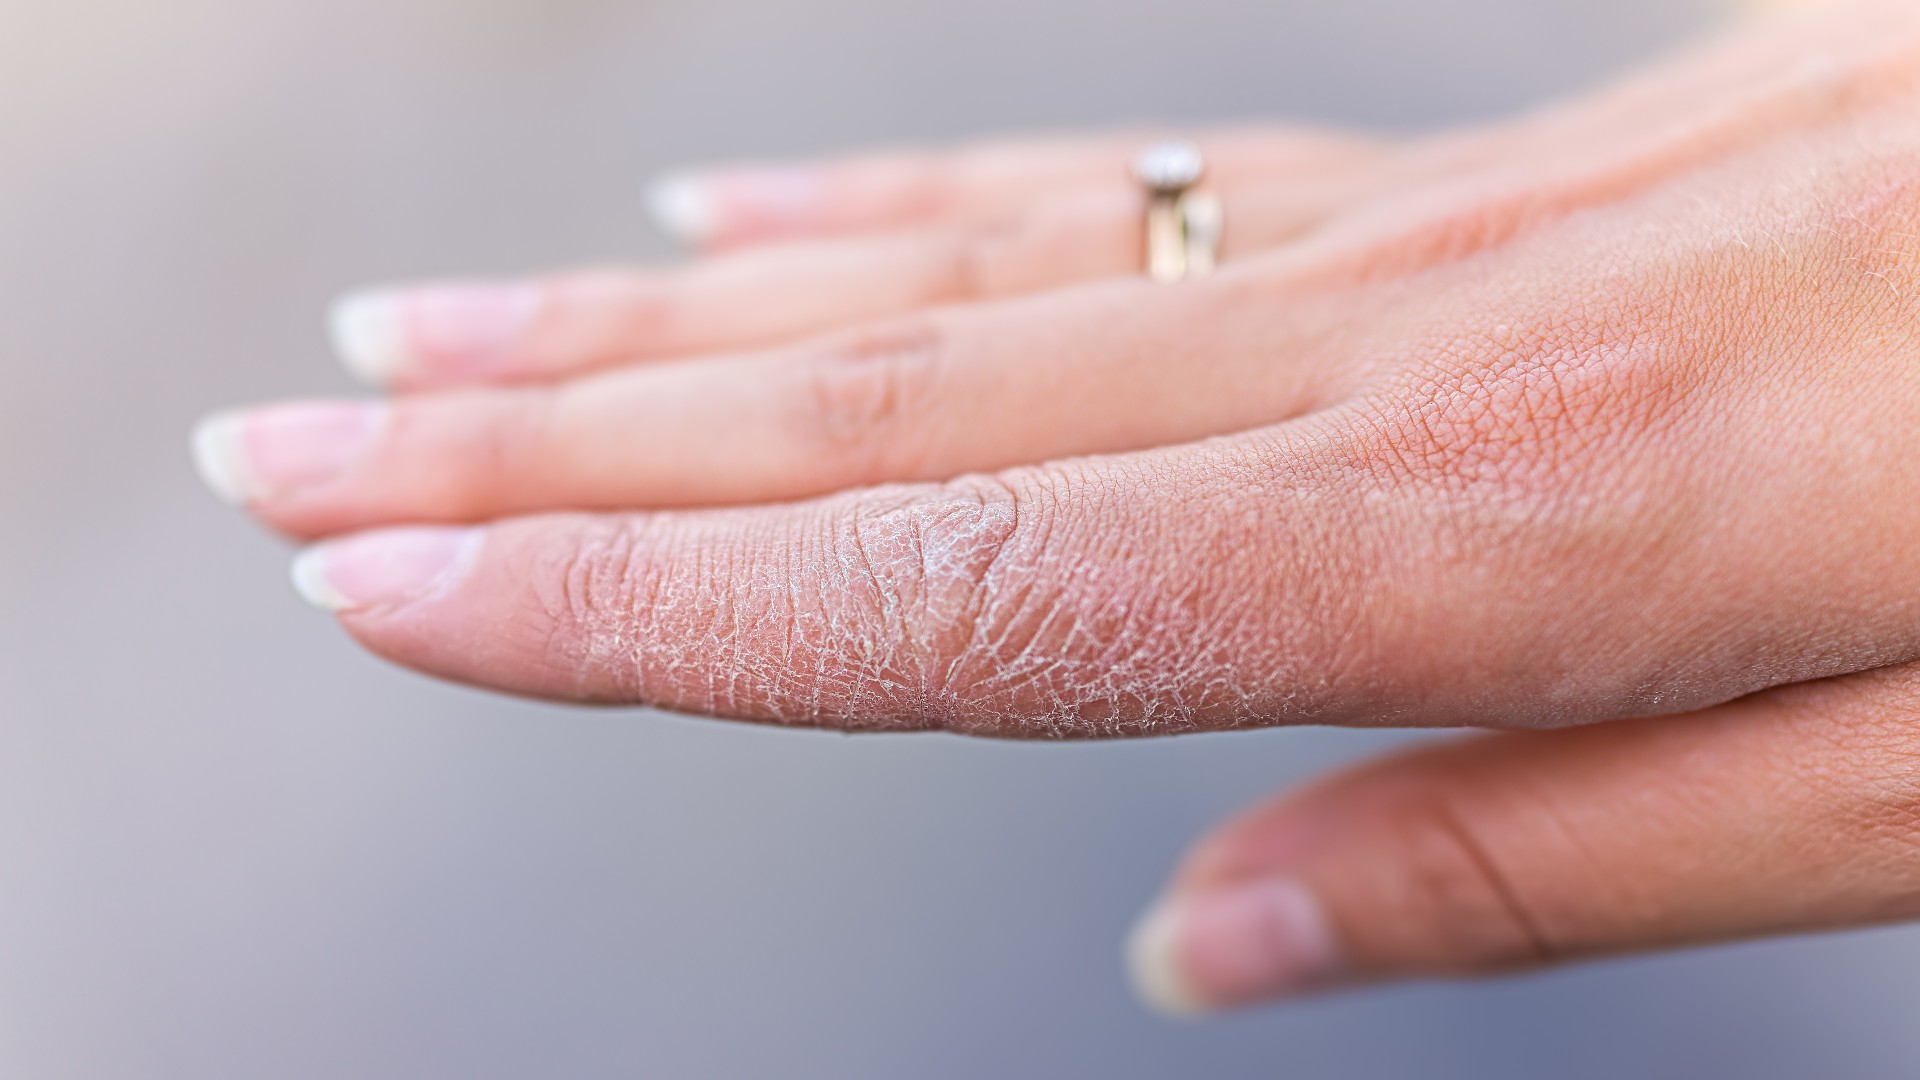 Close-up of dry skin on woman's hand